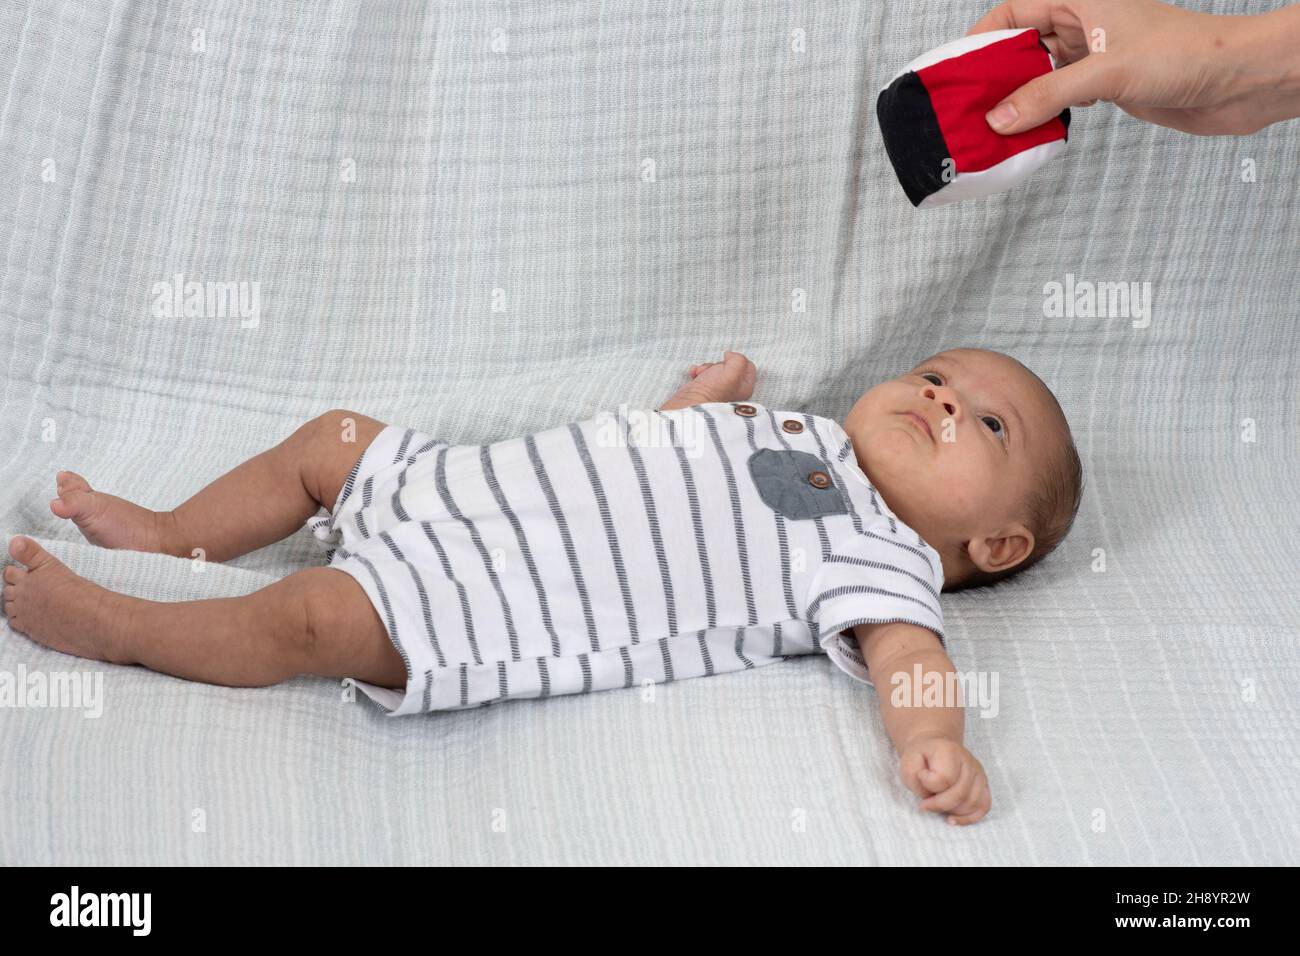 2 month old baby (premature) on back  interested in dangled high contrast toy Stock Photo